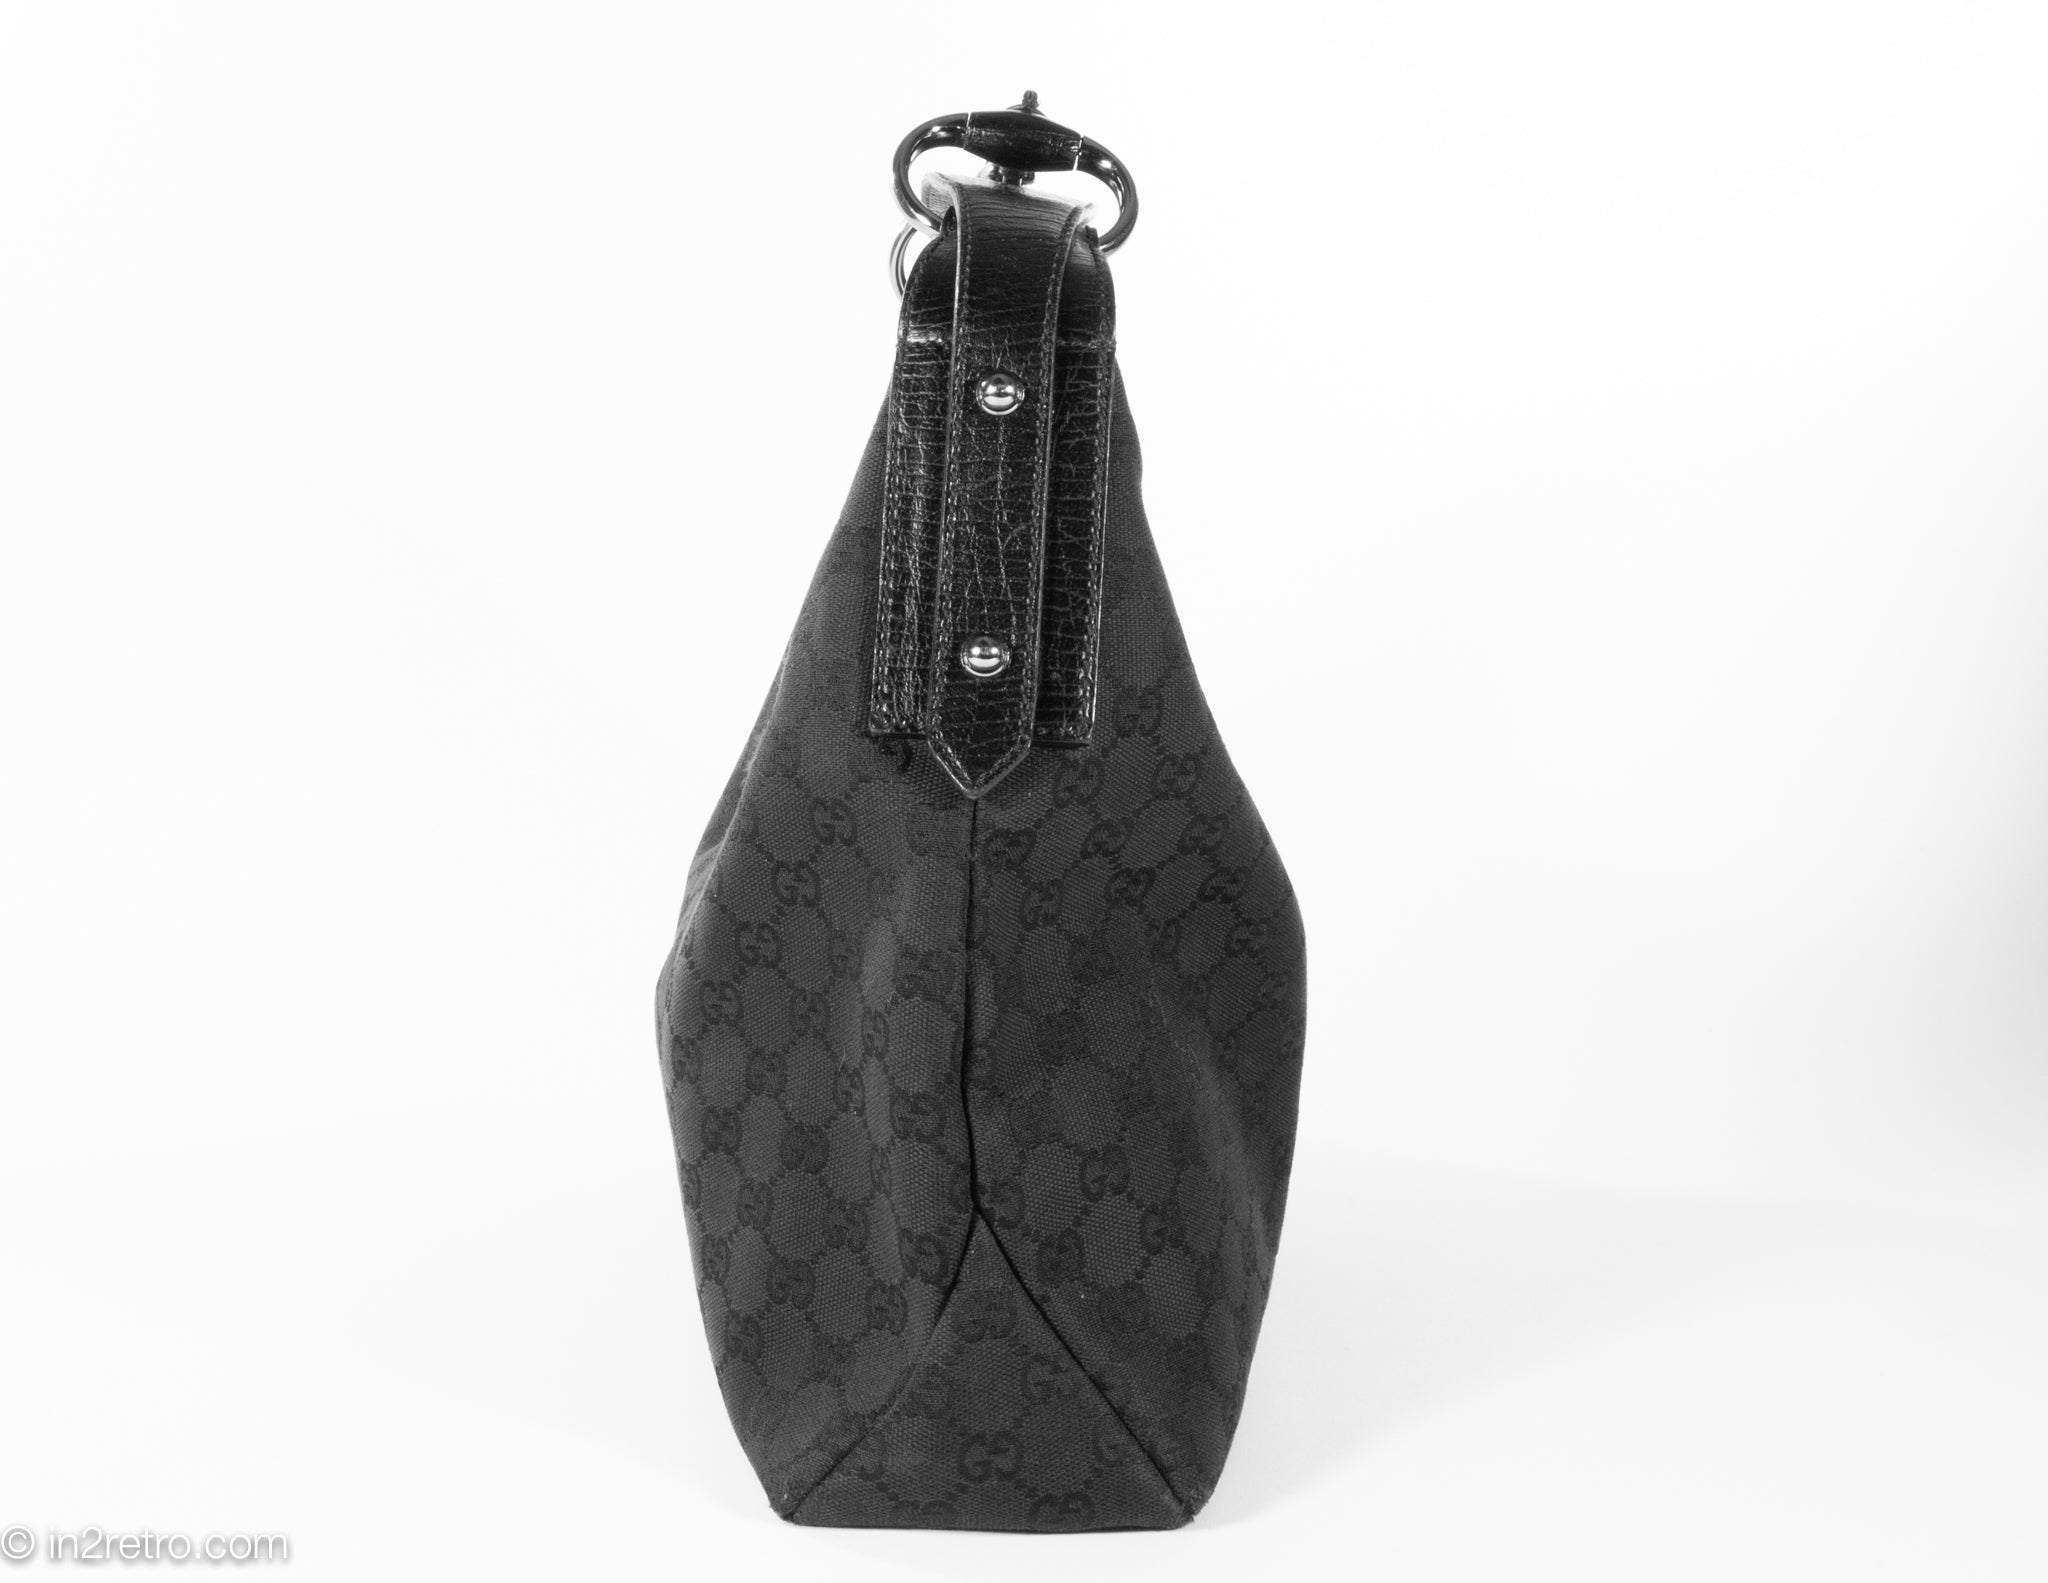 Gucci Signature Large Hobo Bag in Black